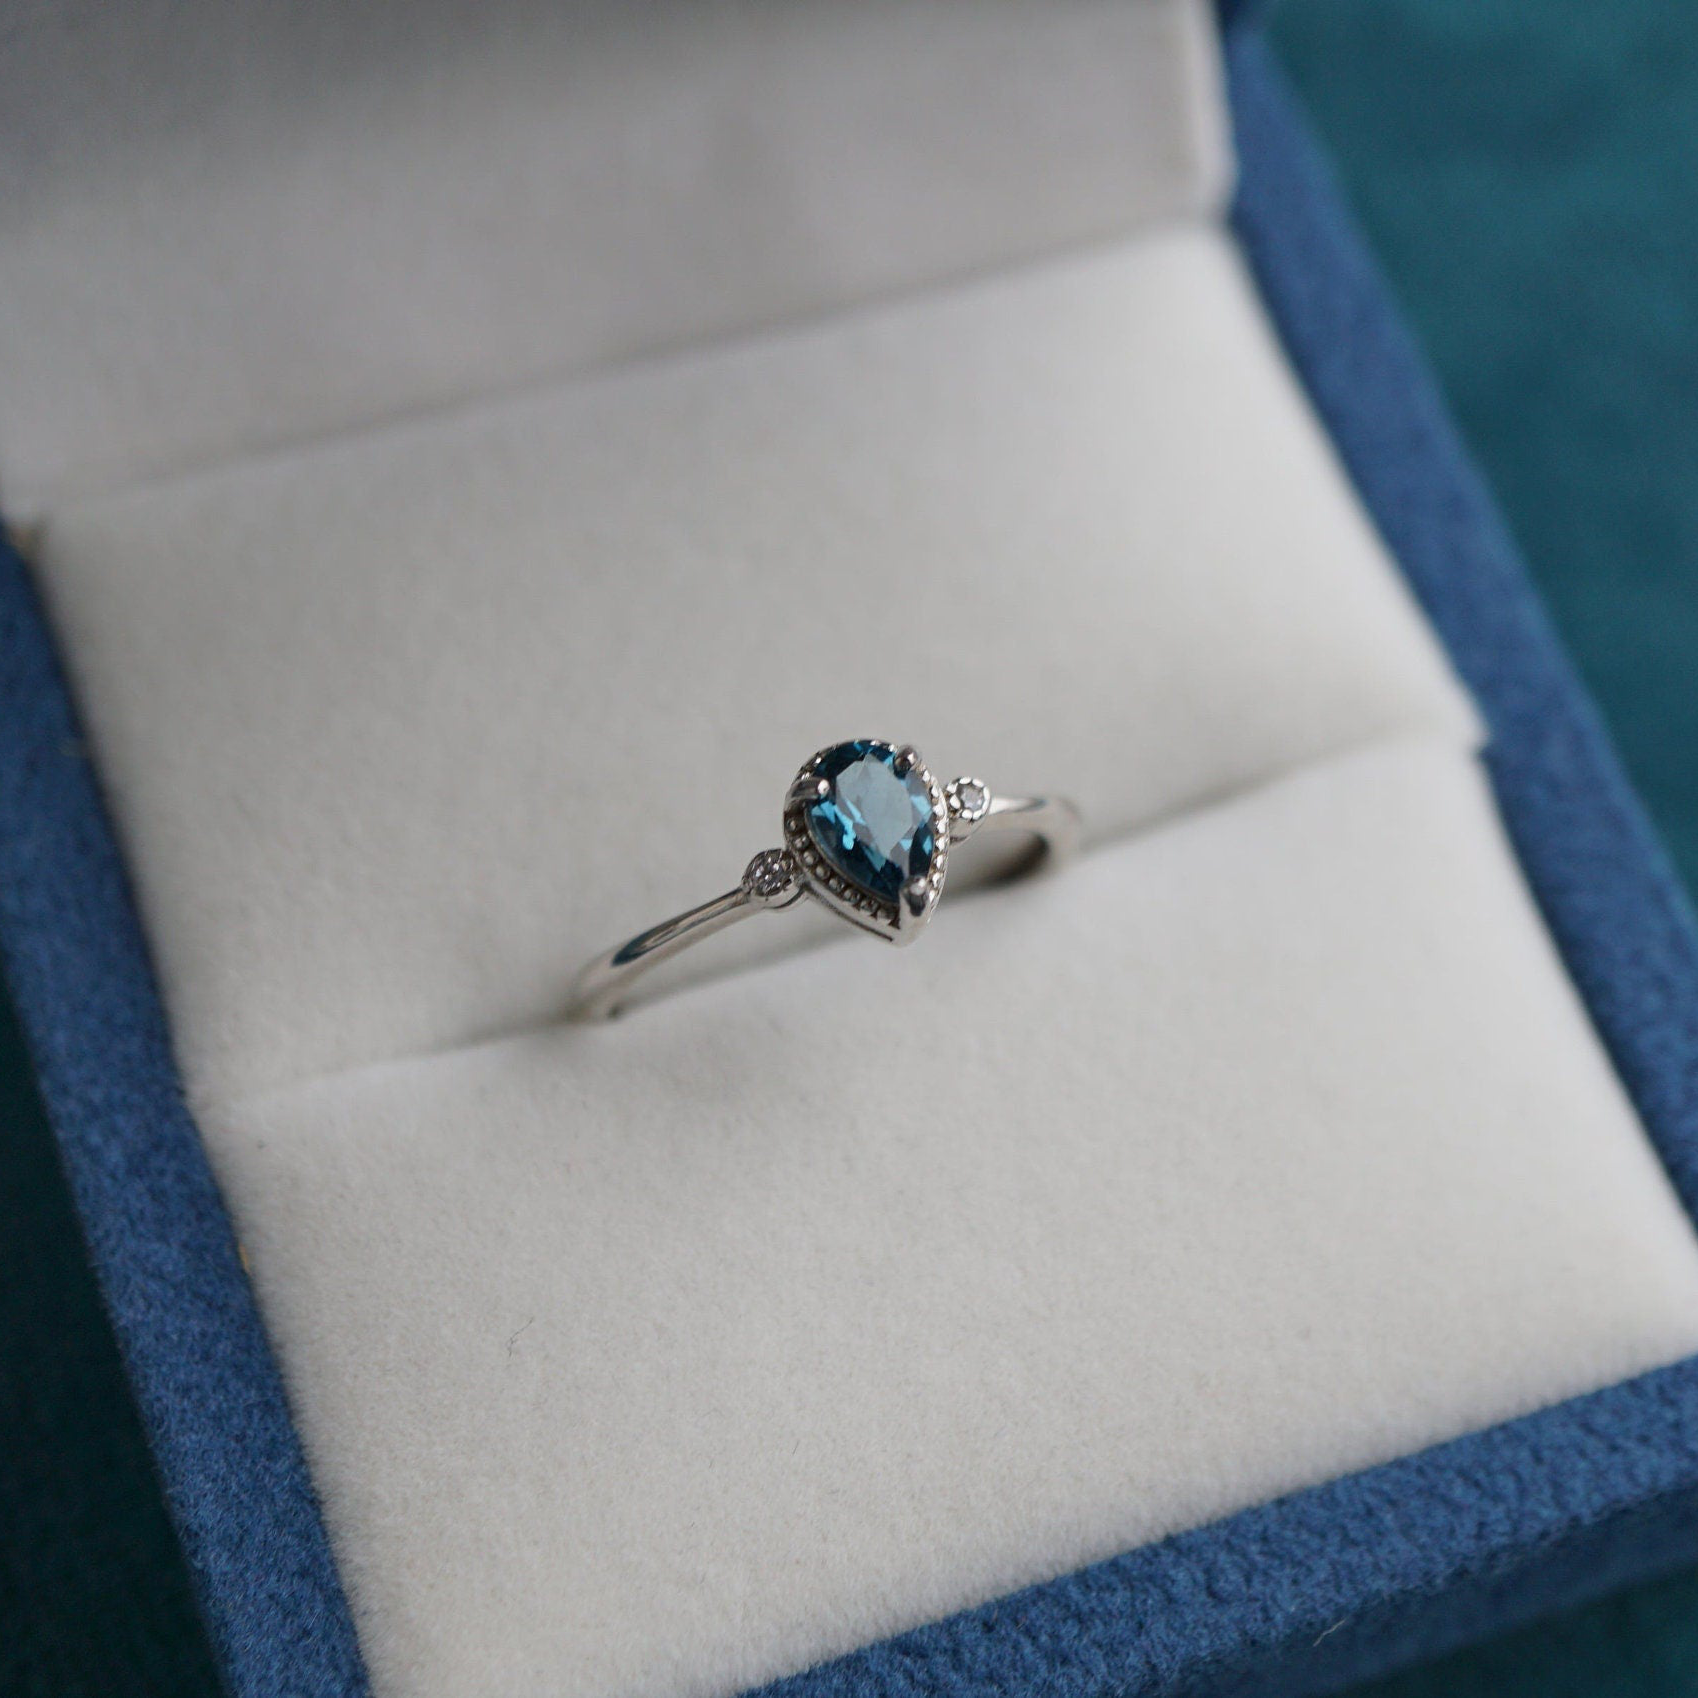 Natural Blue Topaz Ring with Cubic Zirconias